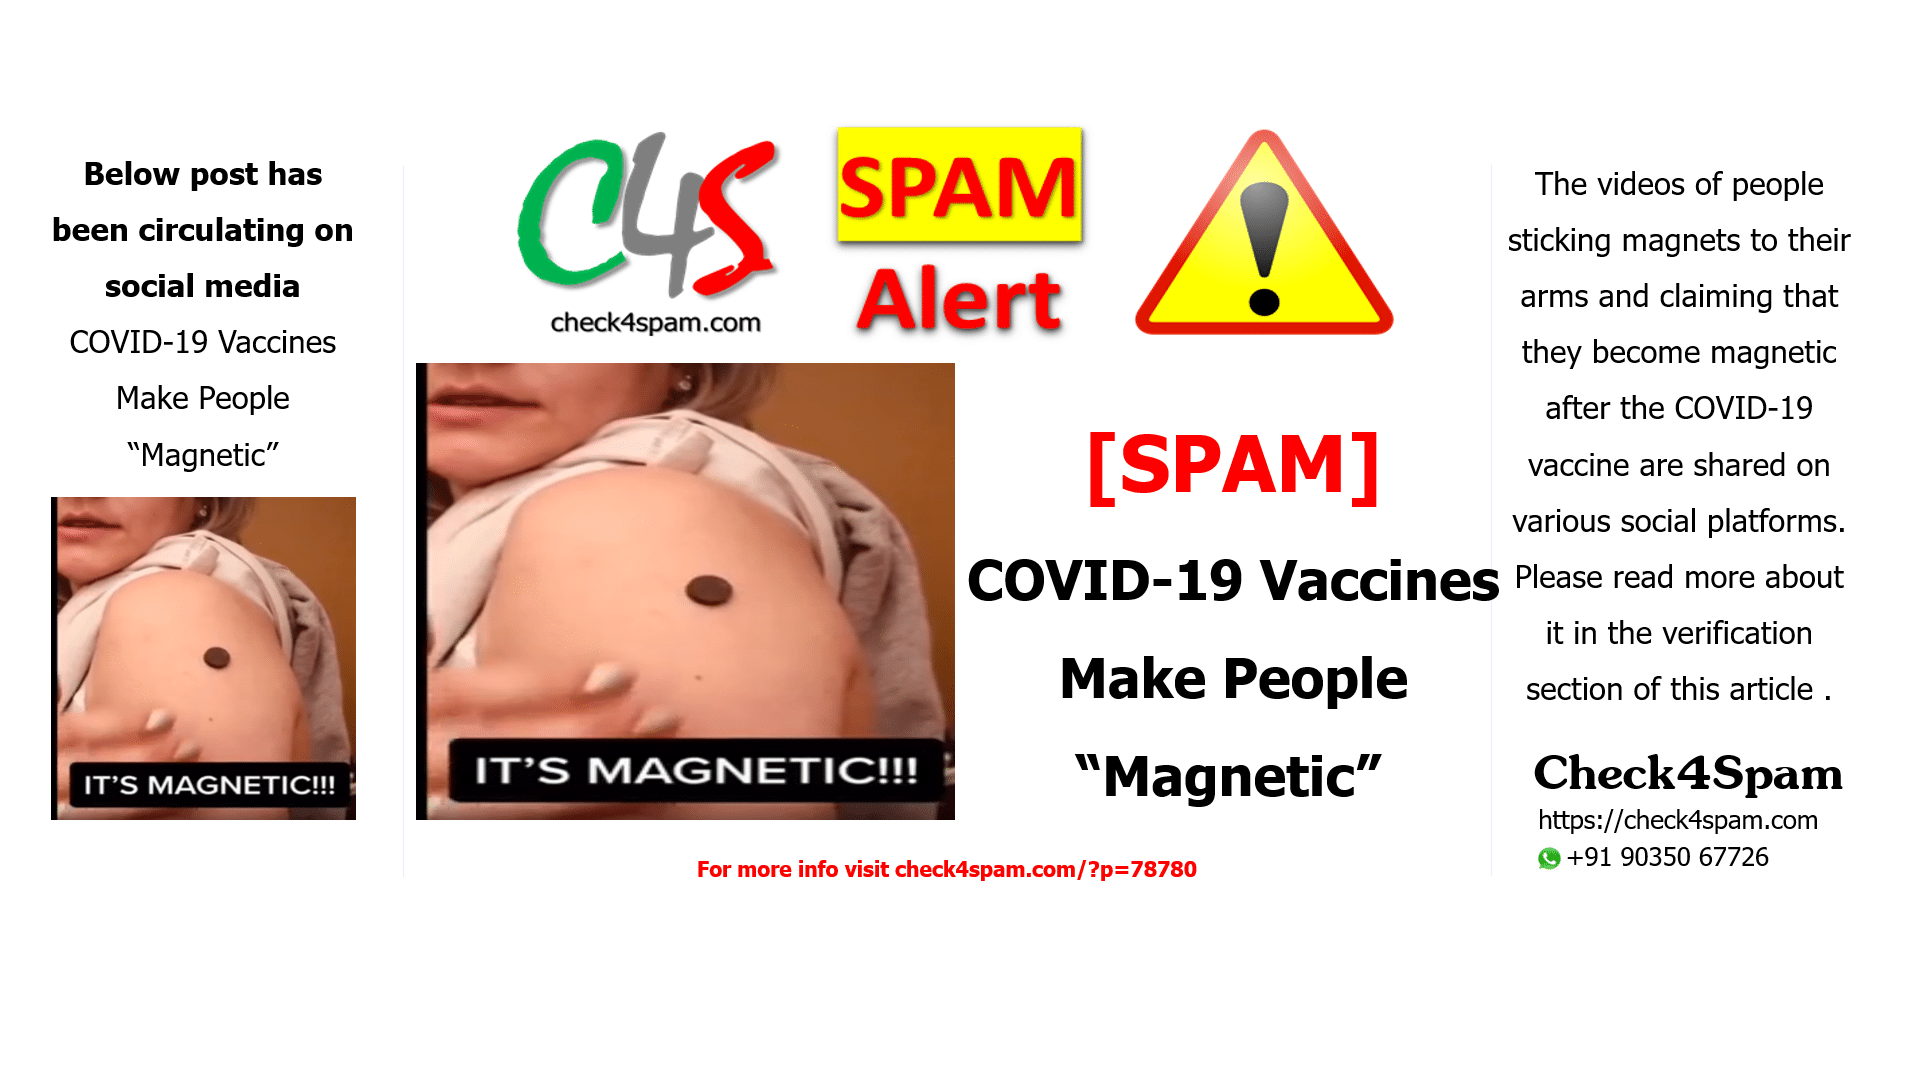 COVID-19 Vaccines Make People “Magnetic”